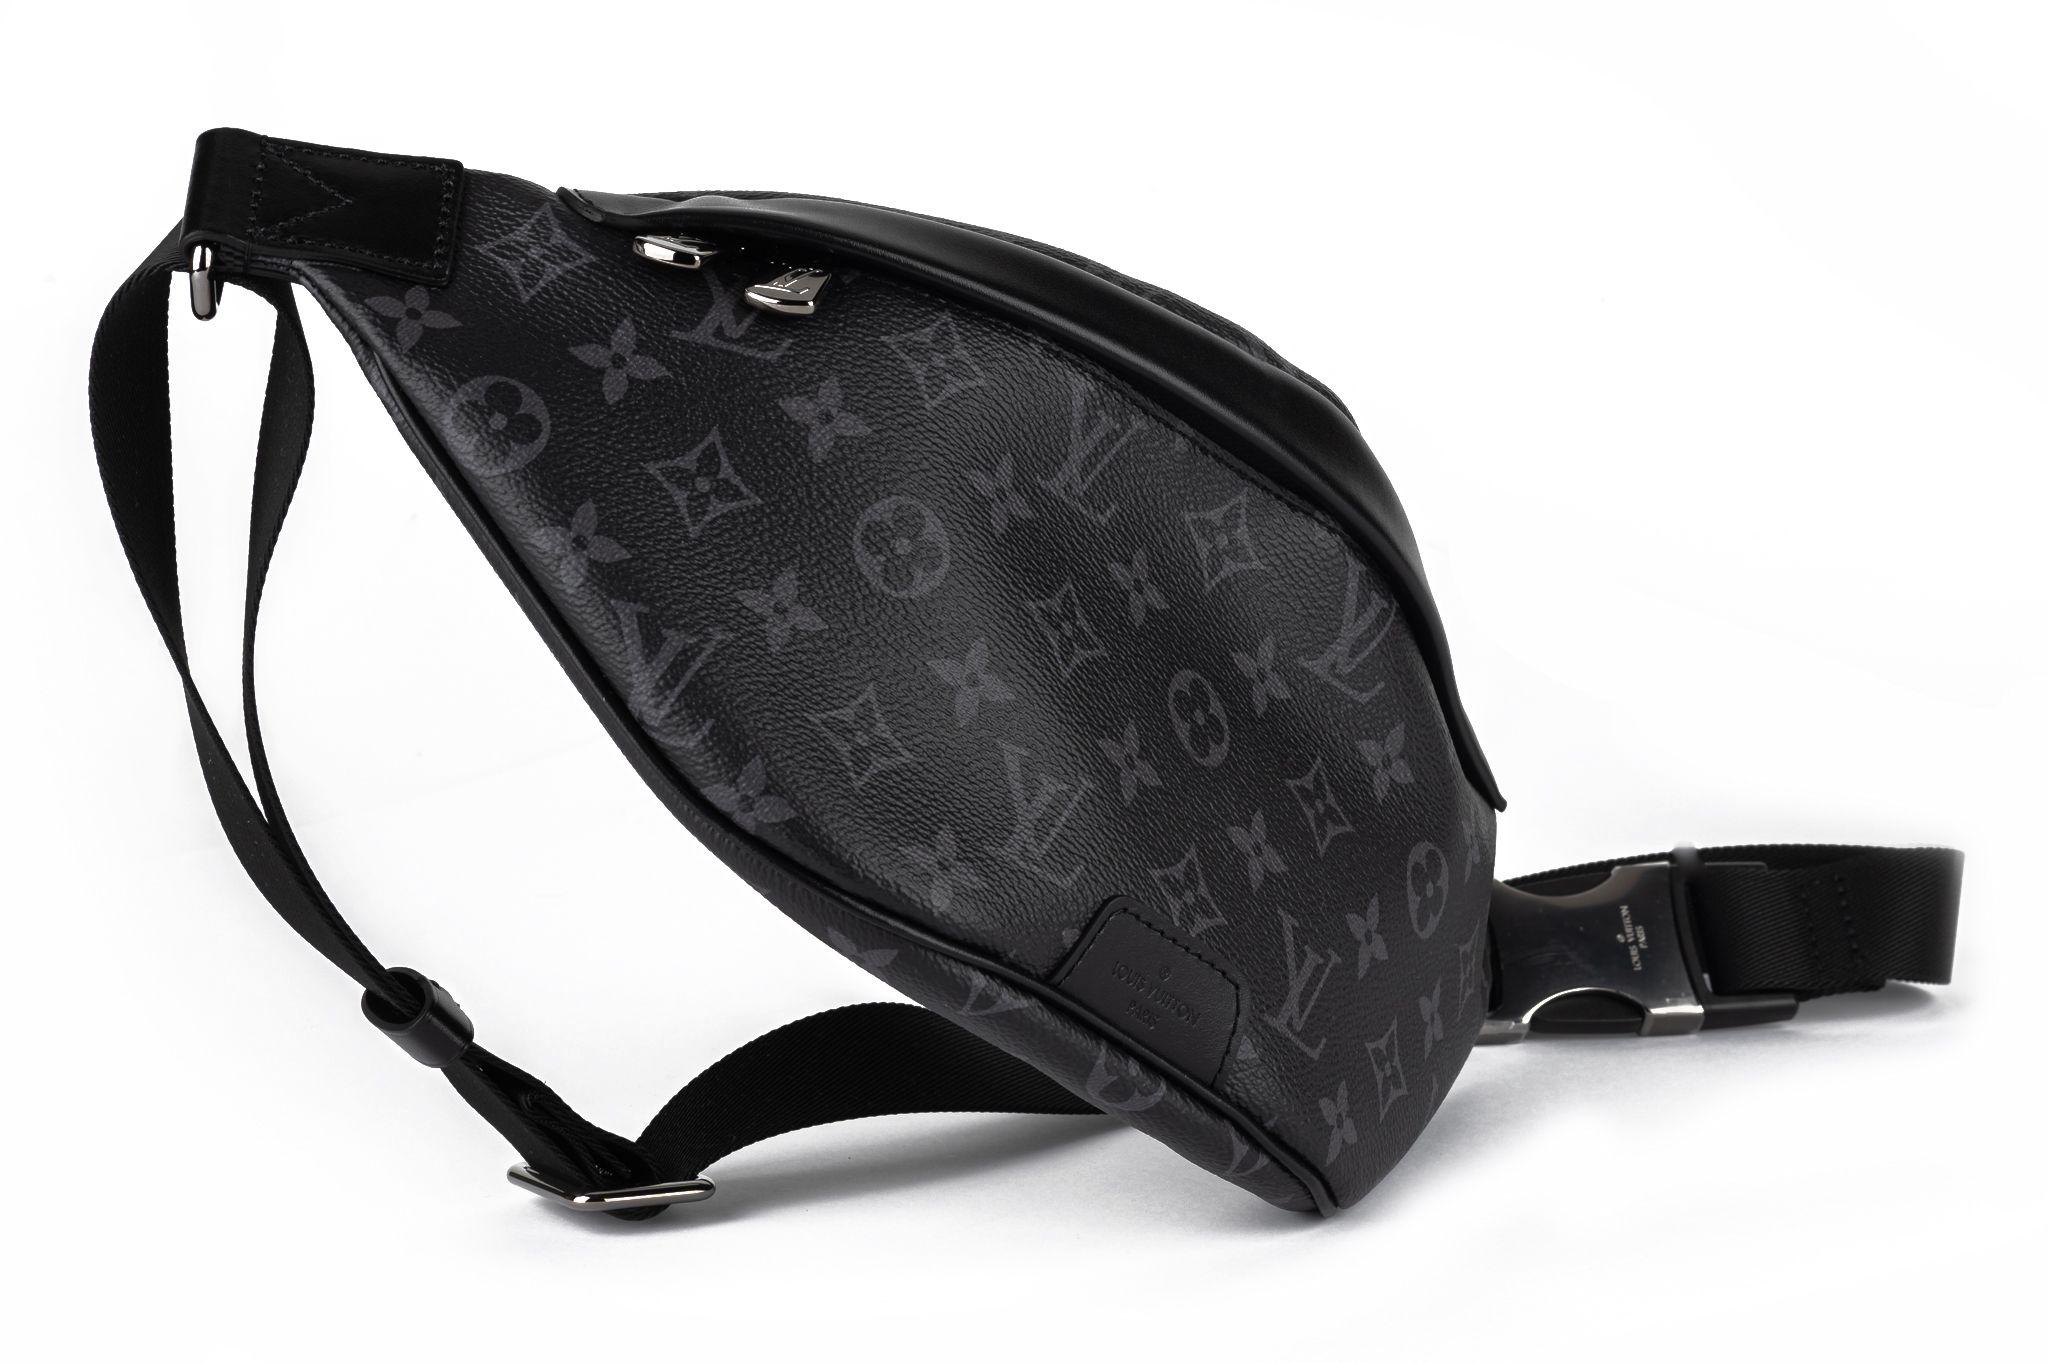 Louis Vuitton new pm grey monogram toile bumbag with adjustable strap. Zipped pockets front and back. Comes with original dustcover and box.